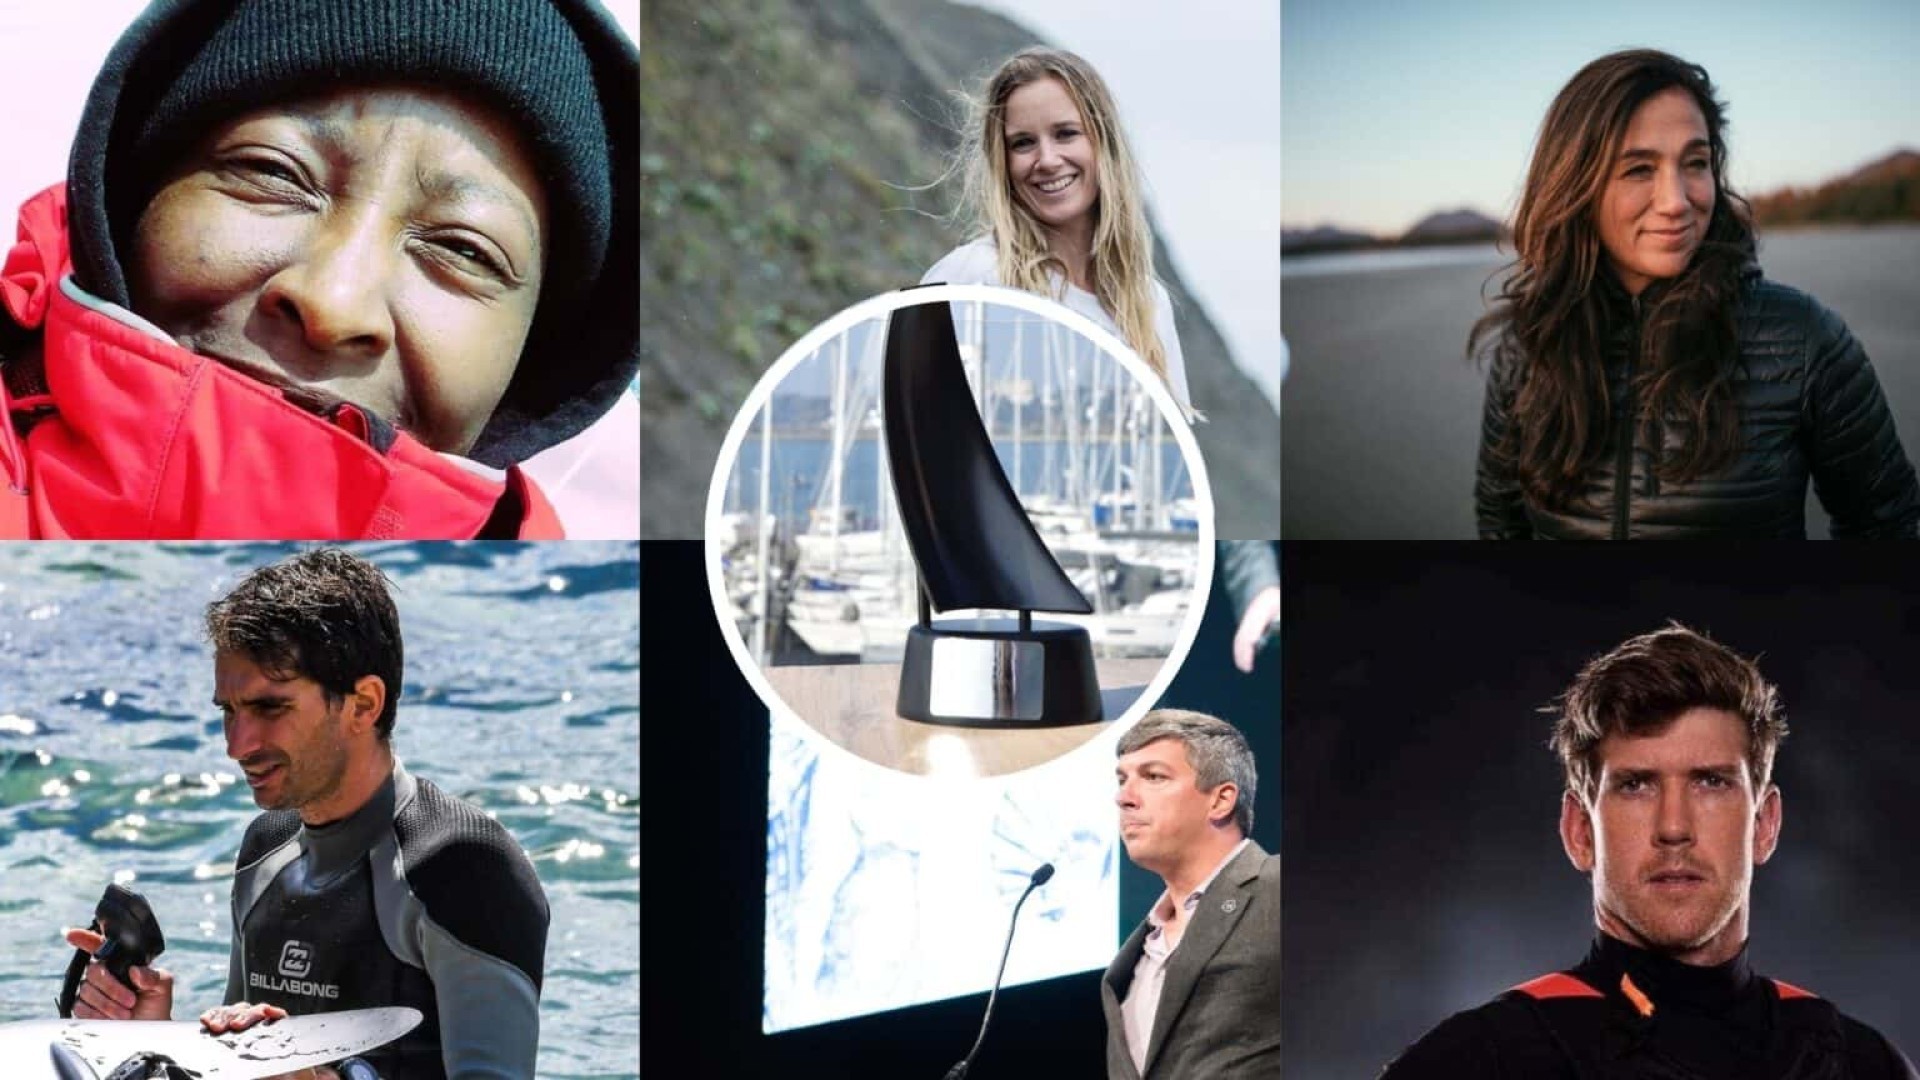 Judging panel announced for World Sailing 11th Hour Racing Sustainability Awards 2022